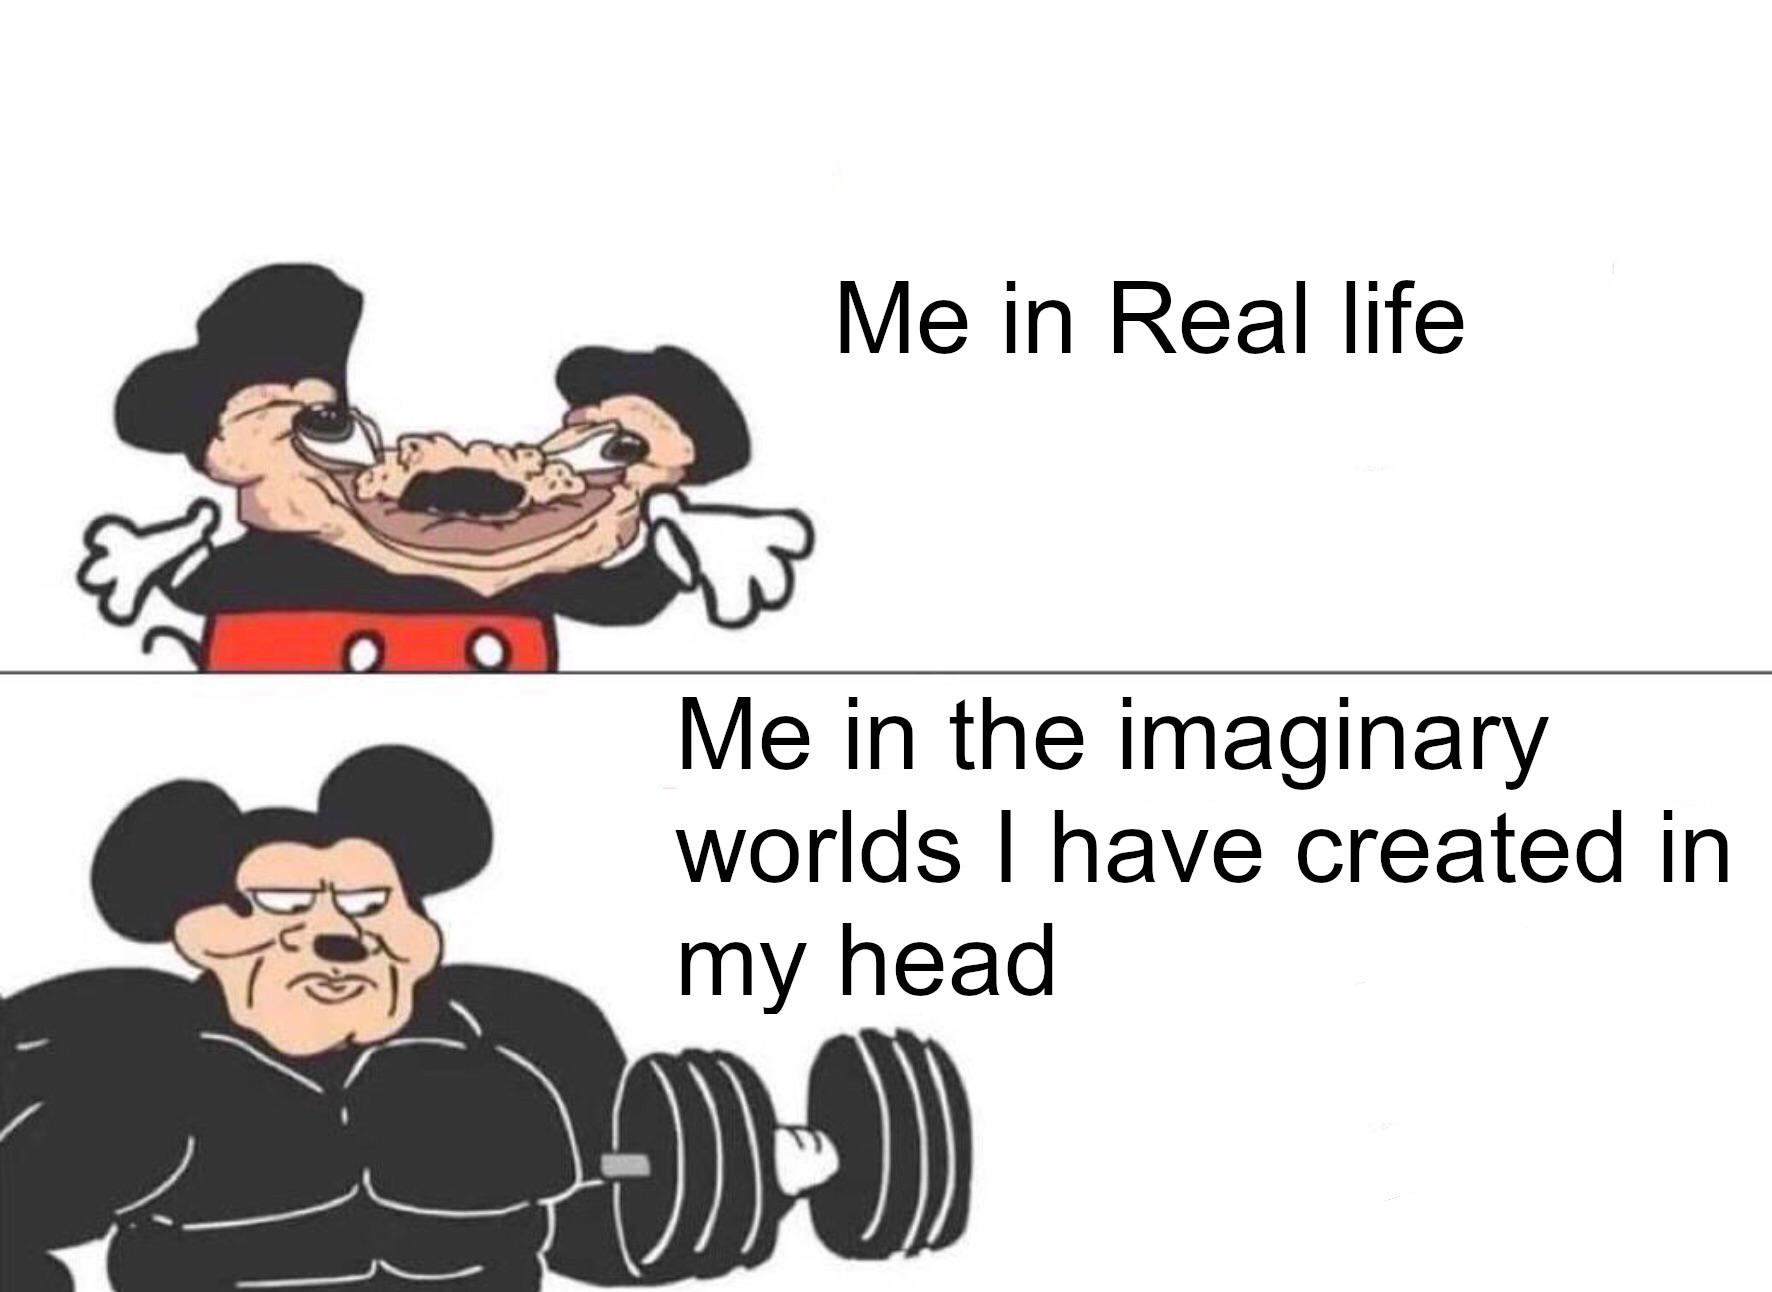 Depression, Mickey, MaladaptiveDreaming depression memes Depression, Mickey, MaladaptiveDreaming text: Me in Real life Me in the imaginary worlds I have created in my head 